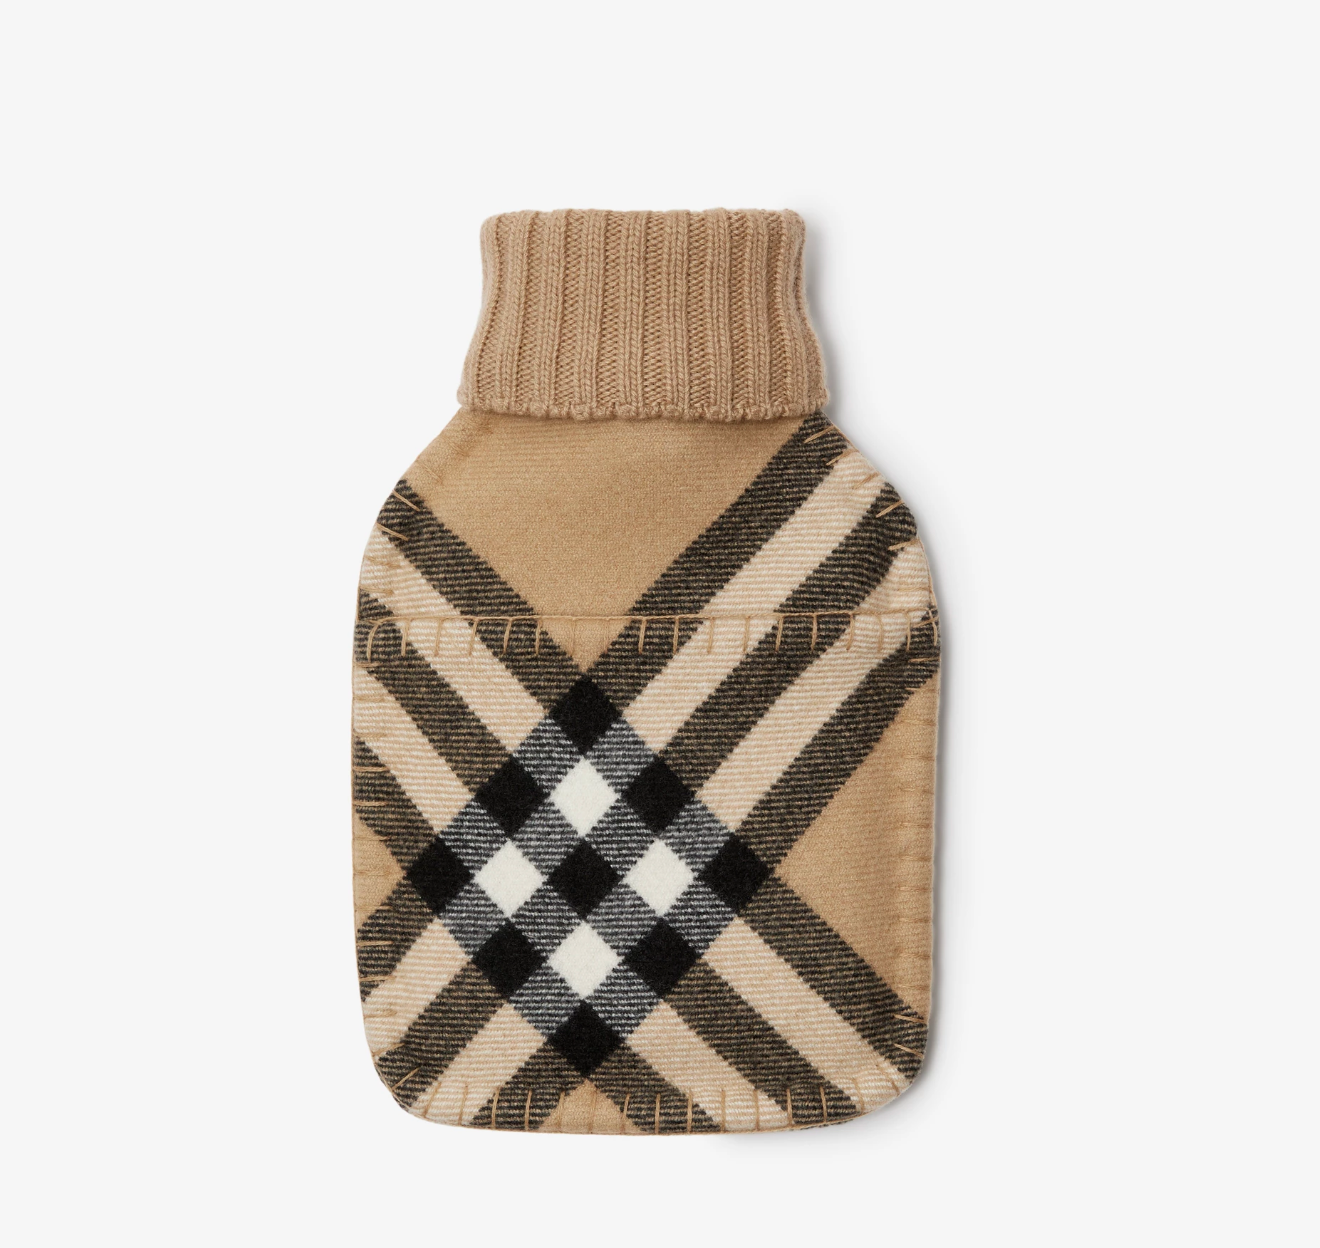 Burberry's hot water bottle has sparked debate across China for its pricing. Photo: Burberry